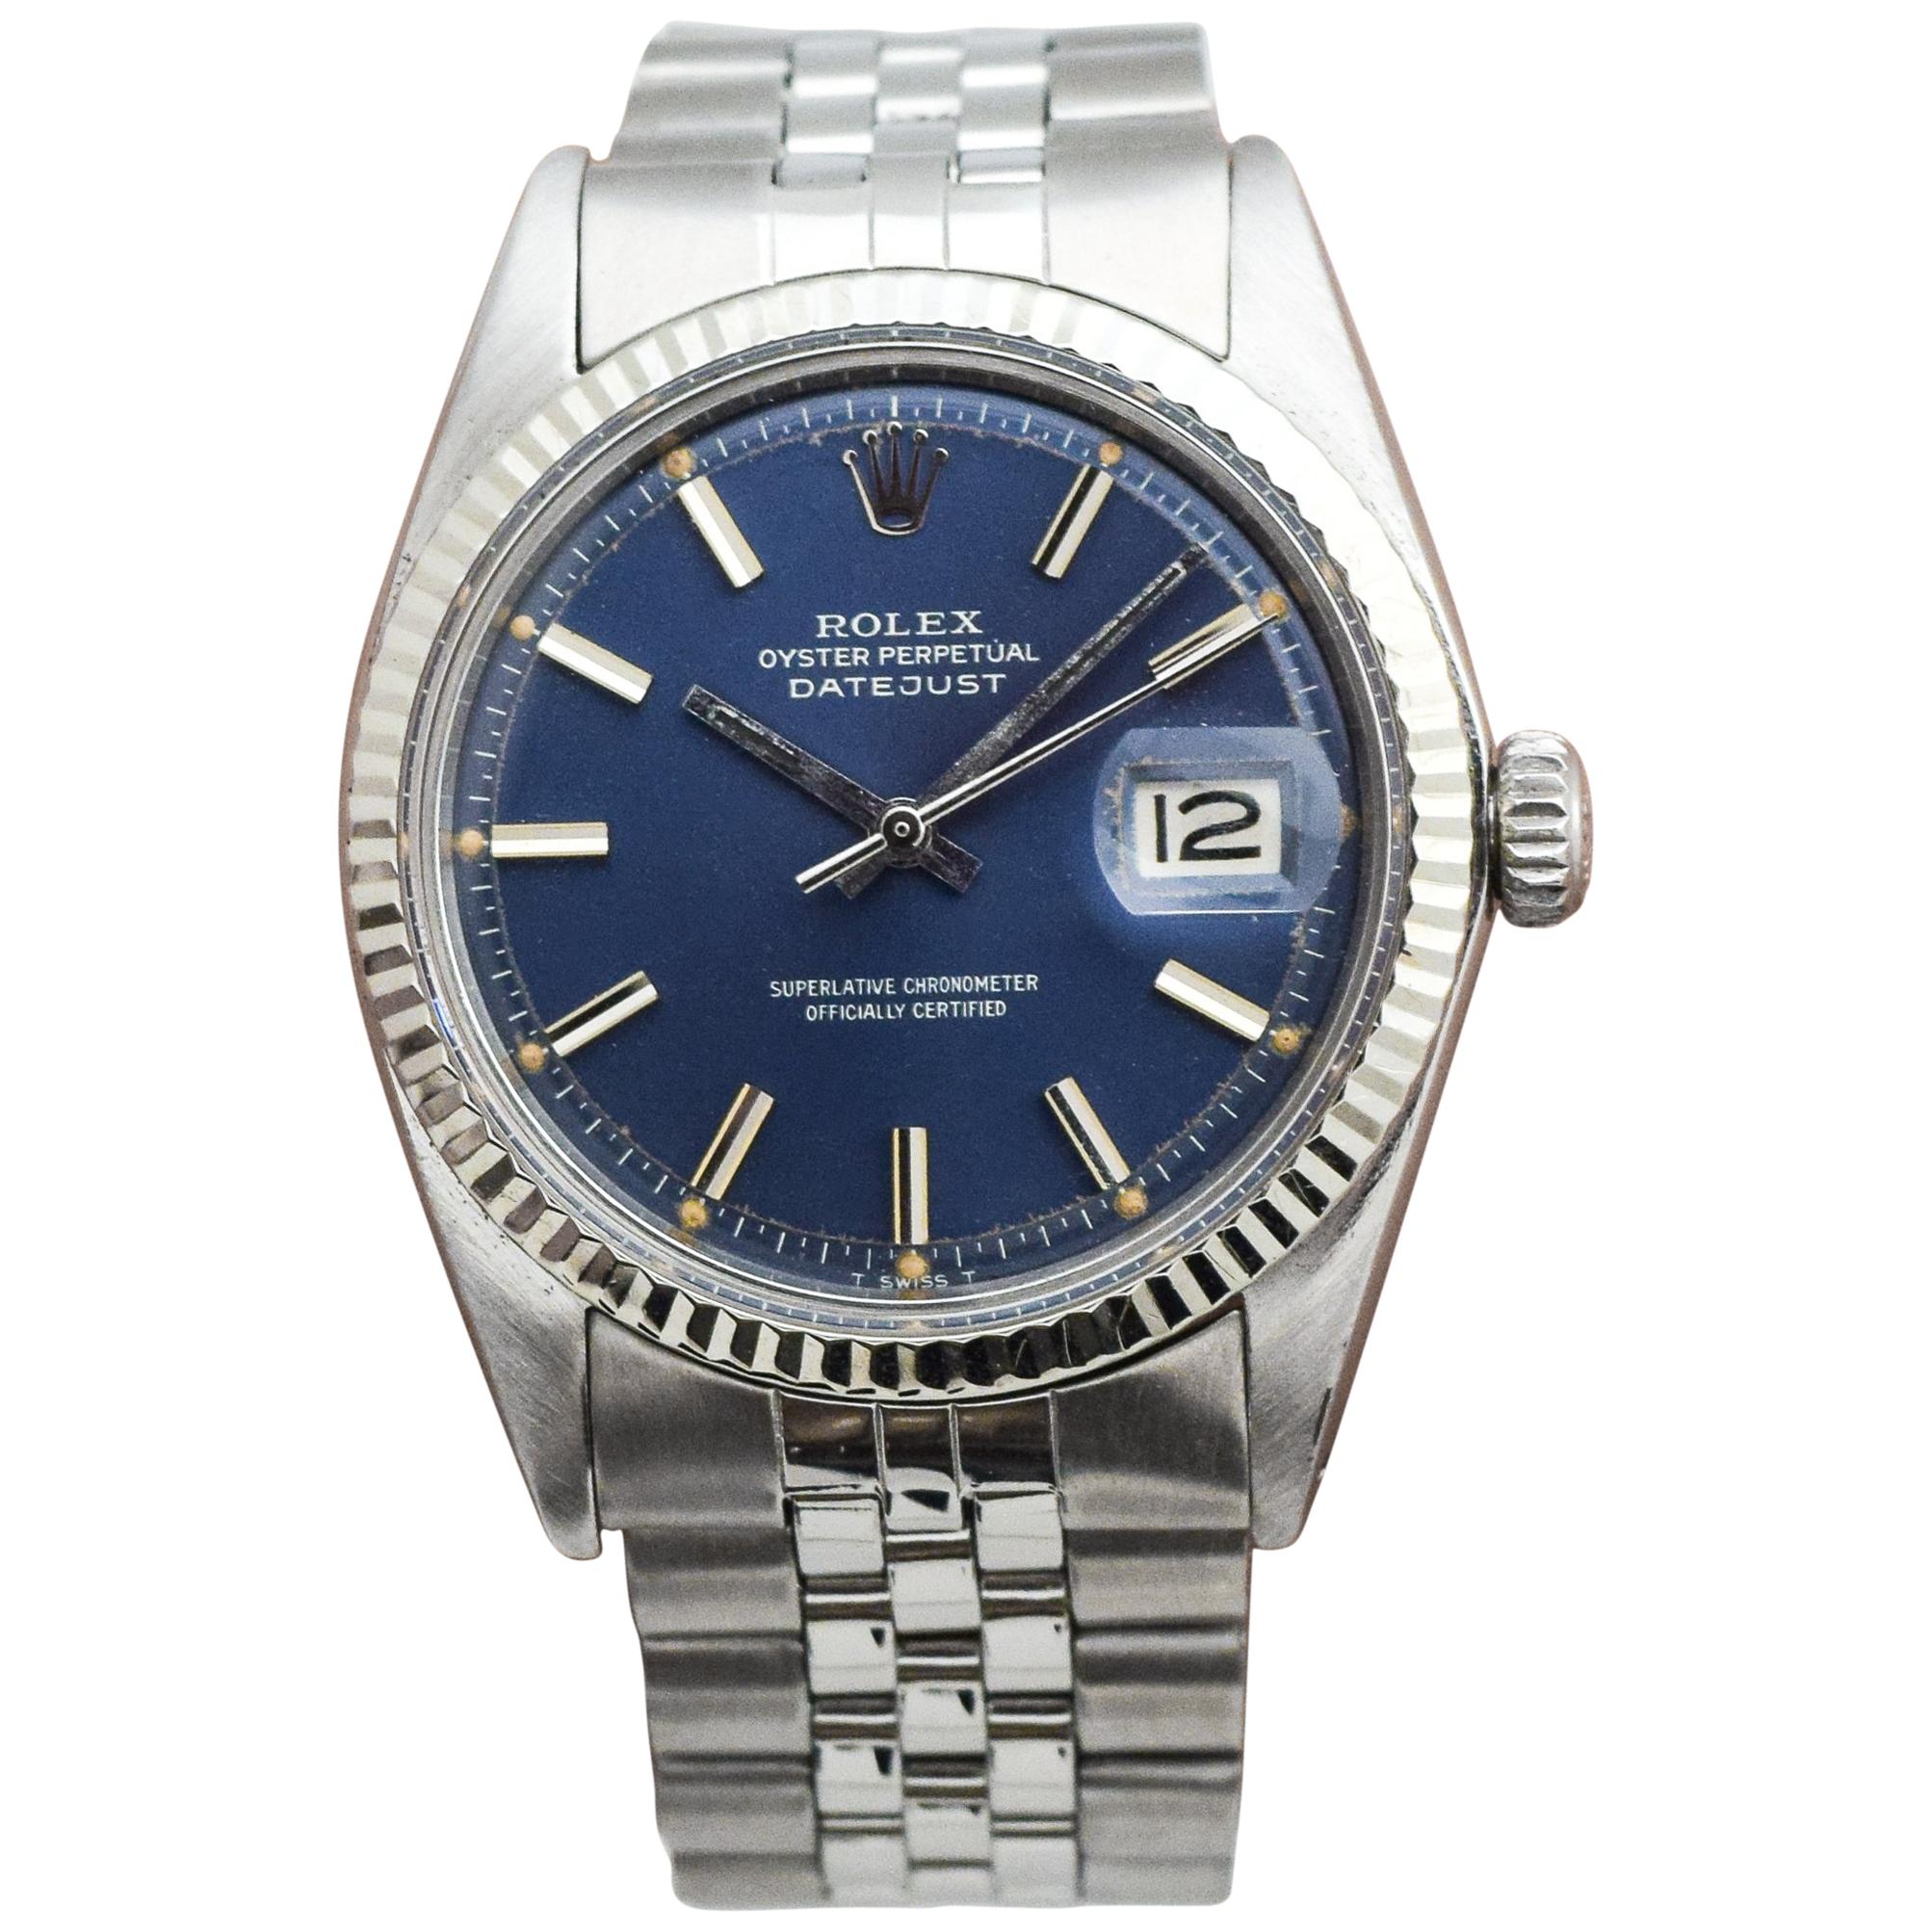 Rolex Datejust Reference 1601 with a Blue Dial, 1971